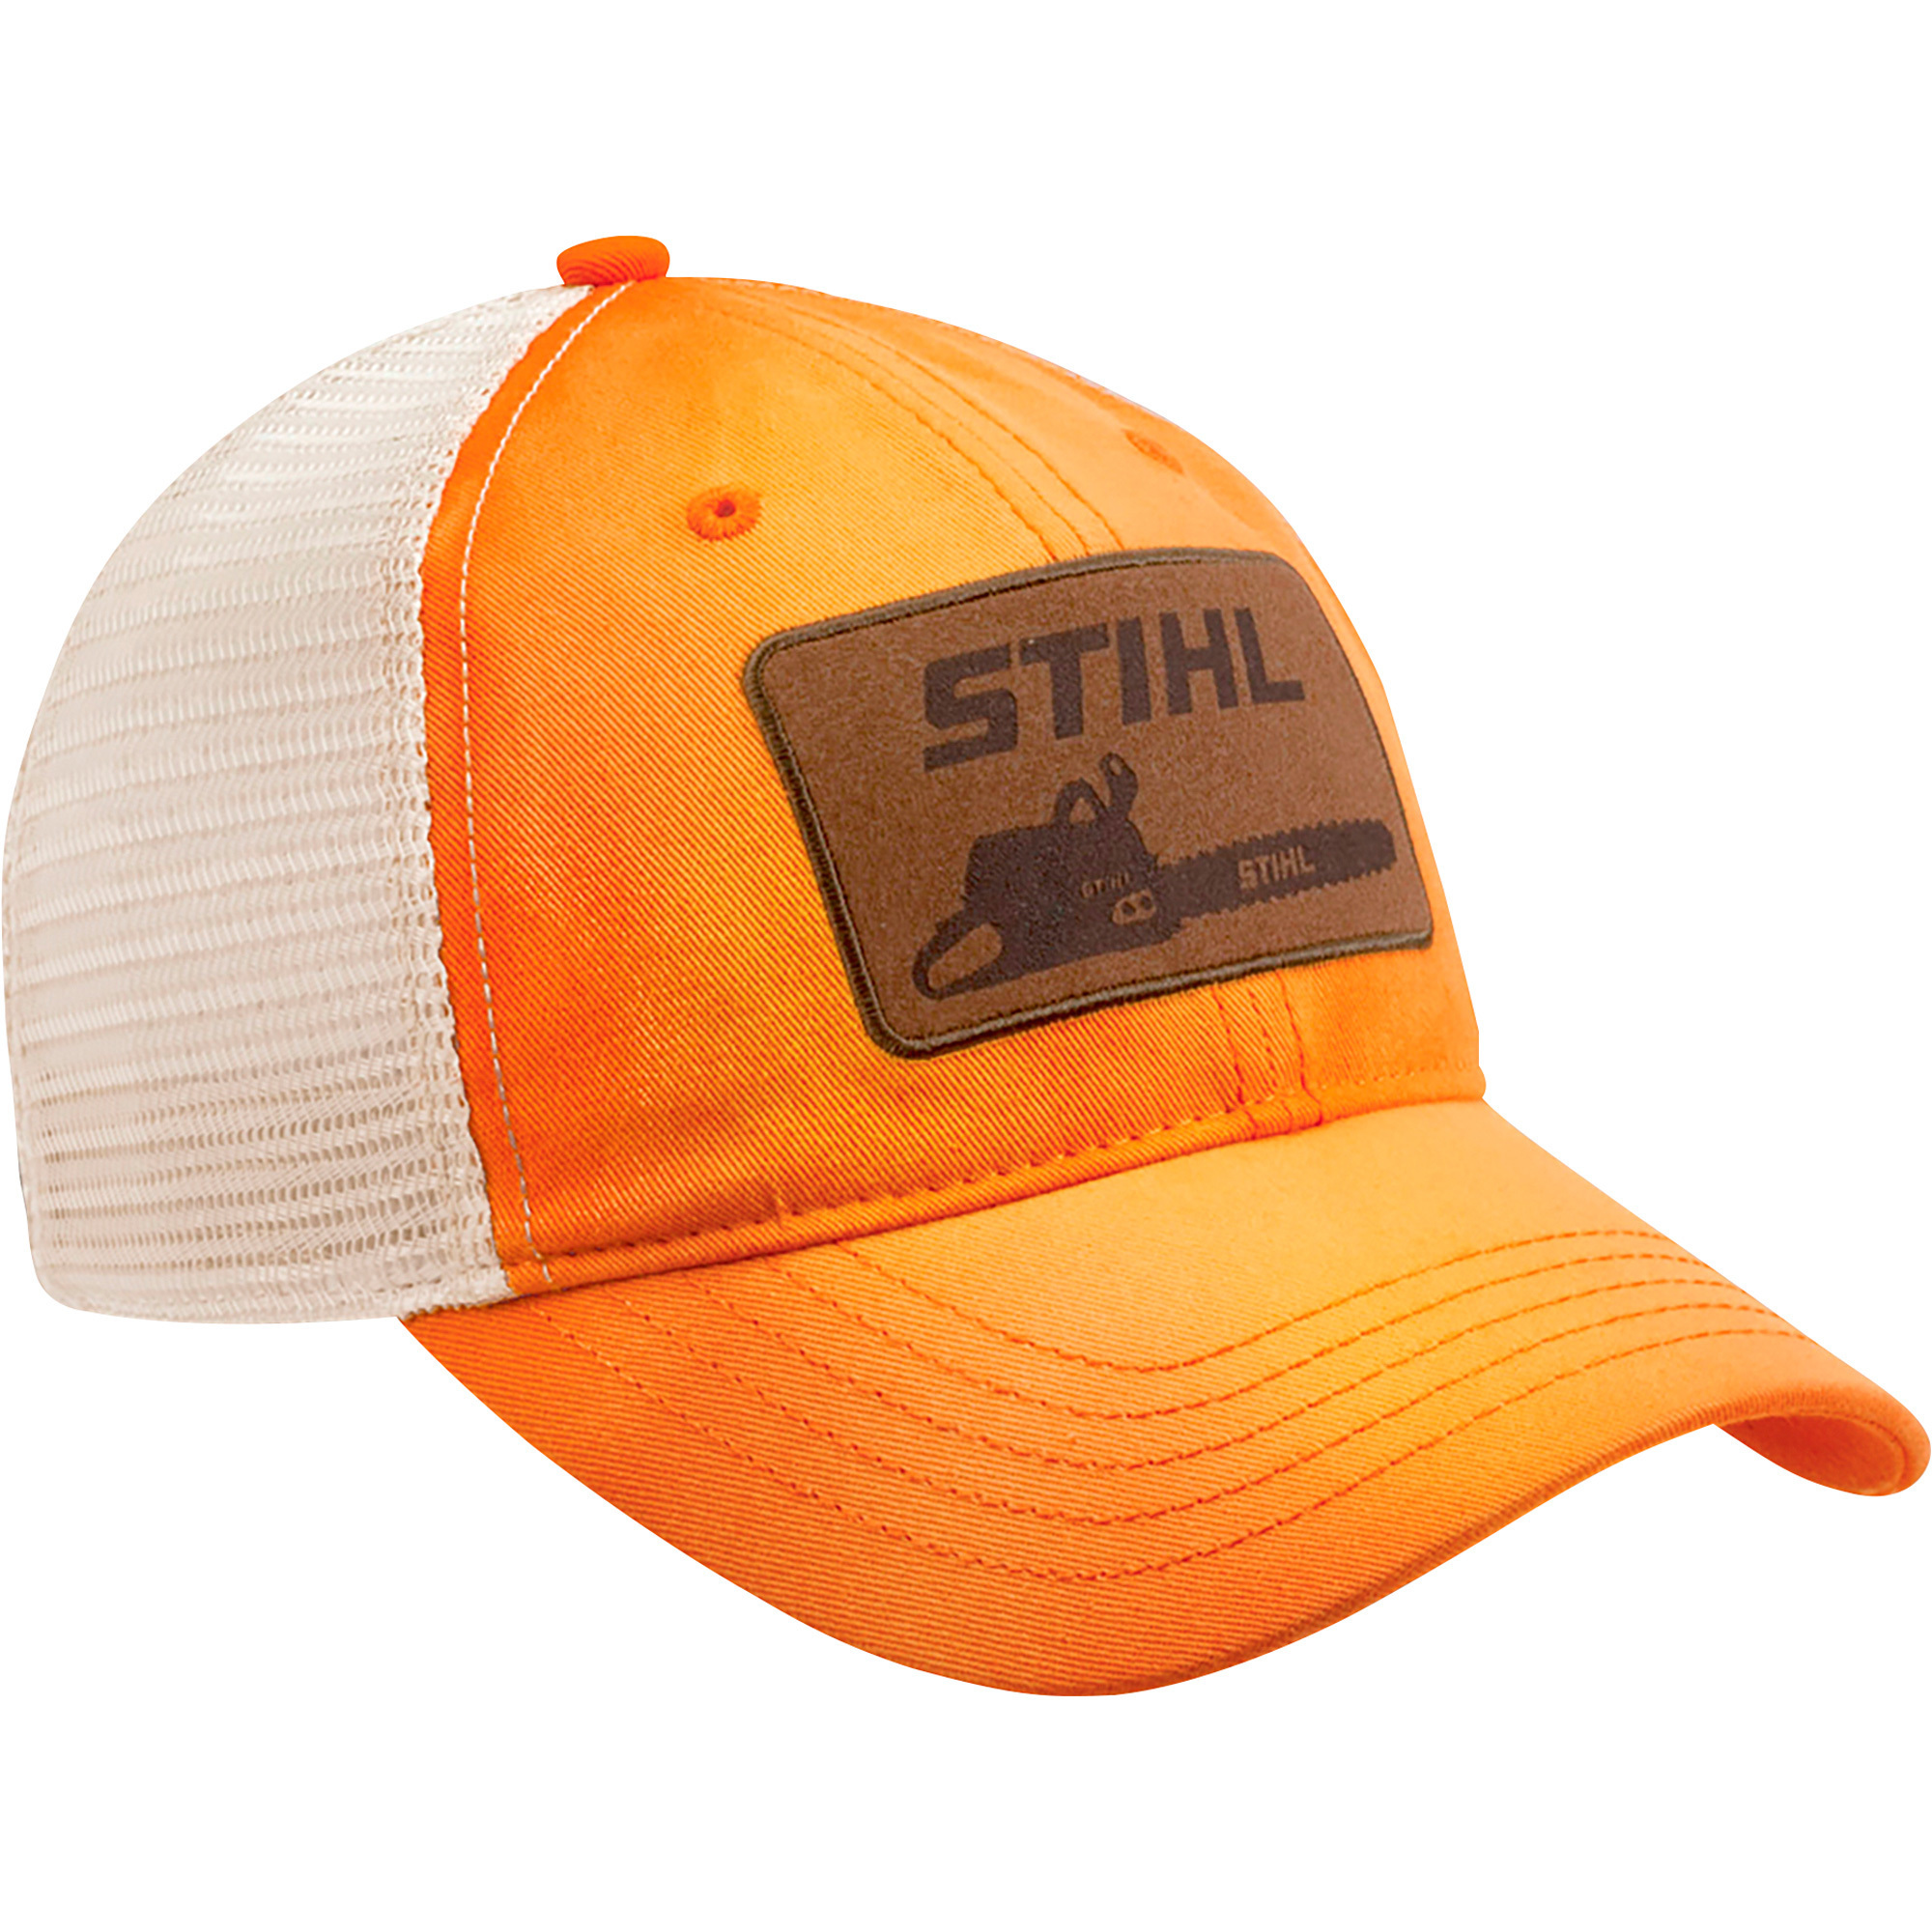 STIHL Outfitters Twill Cap with Chainsaw Graphic and Mesh Back â Adjustable, Washed Orange/Off-White